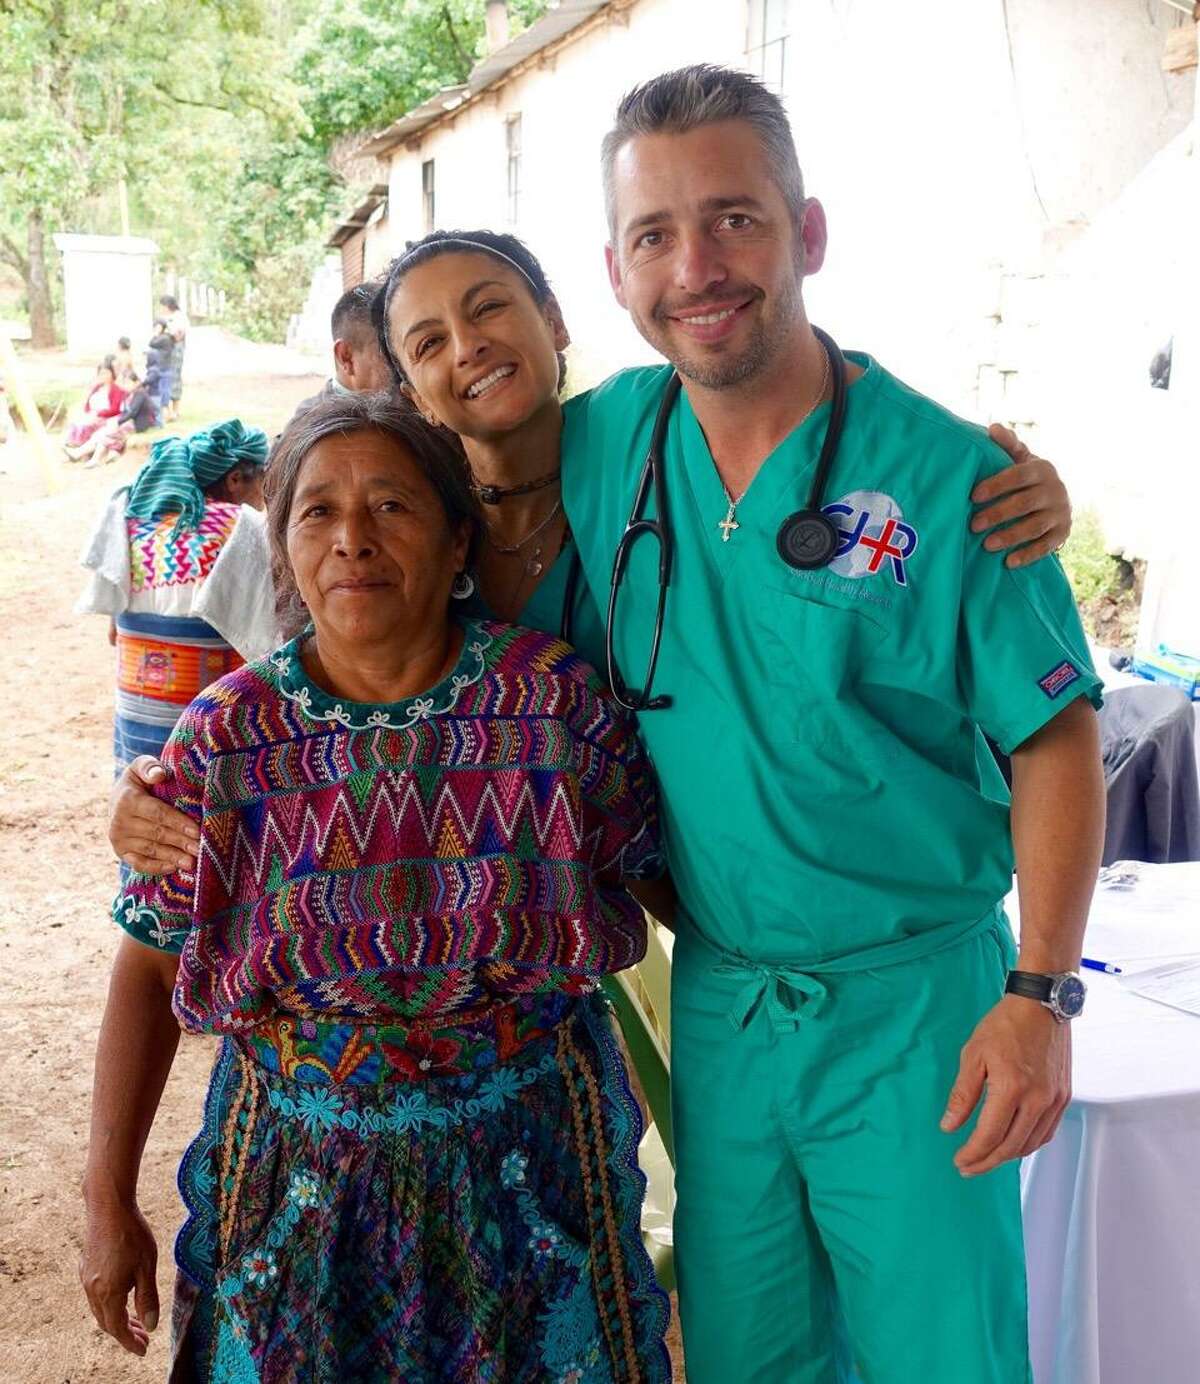 Art Campsey and Claudia Weiderman with Guatemalan patient during a Global Health Reach trip to Santa Apolonia, Guatemala, in June. GHR provides ongoing medical care to underserved communities in Guatemala and Vietnam.